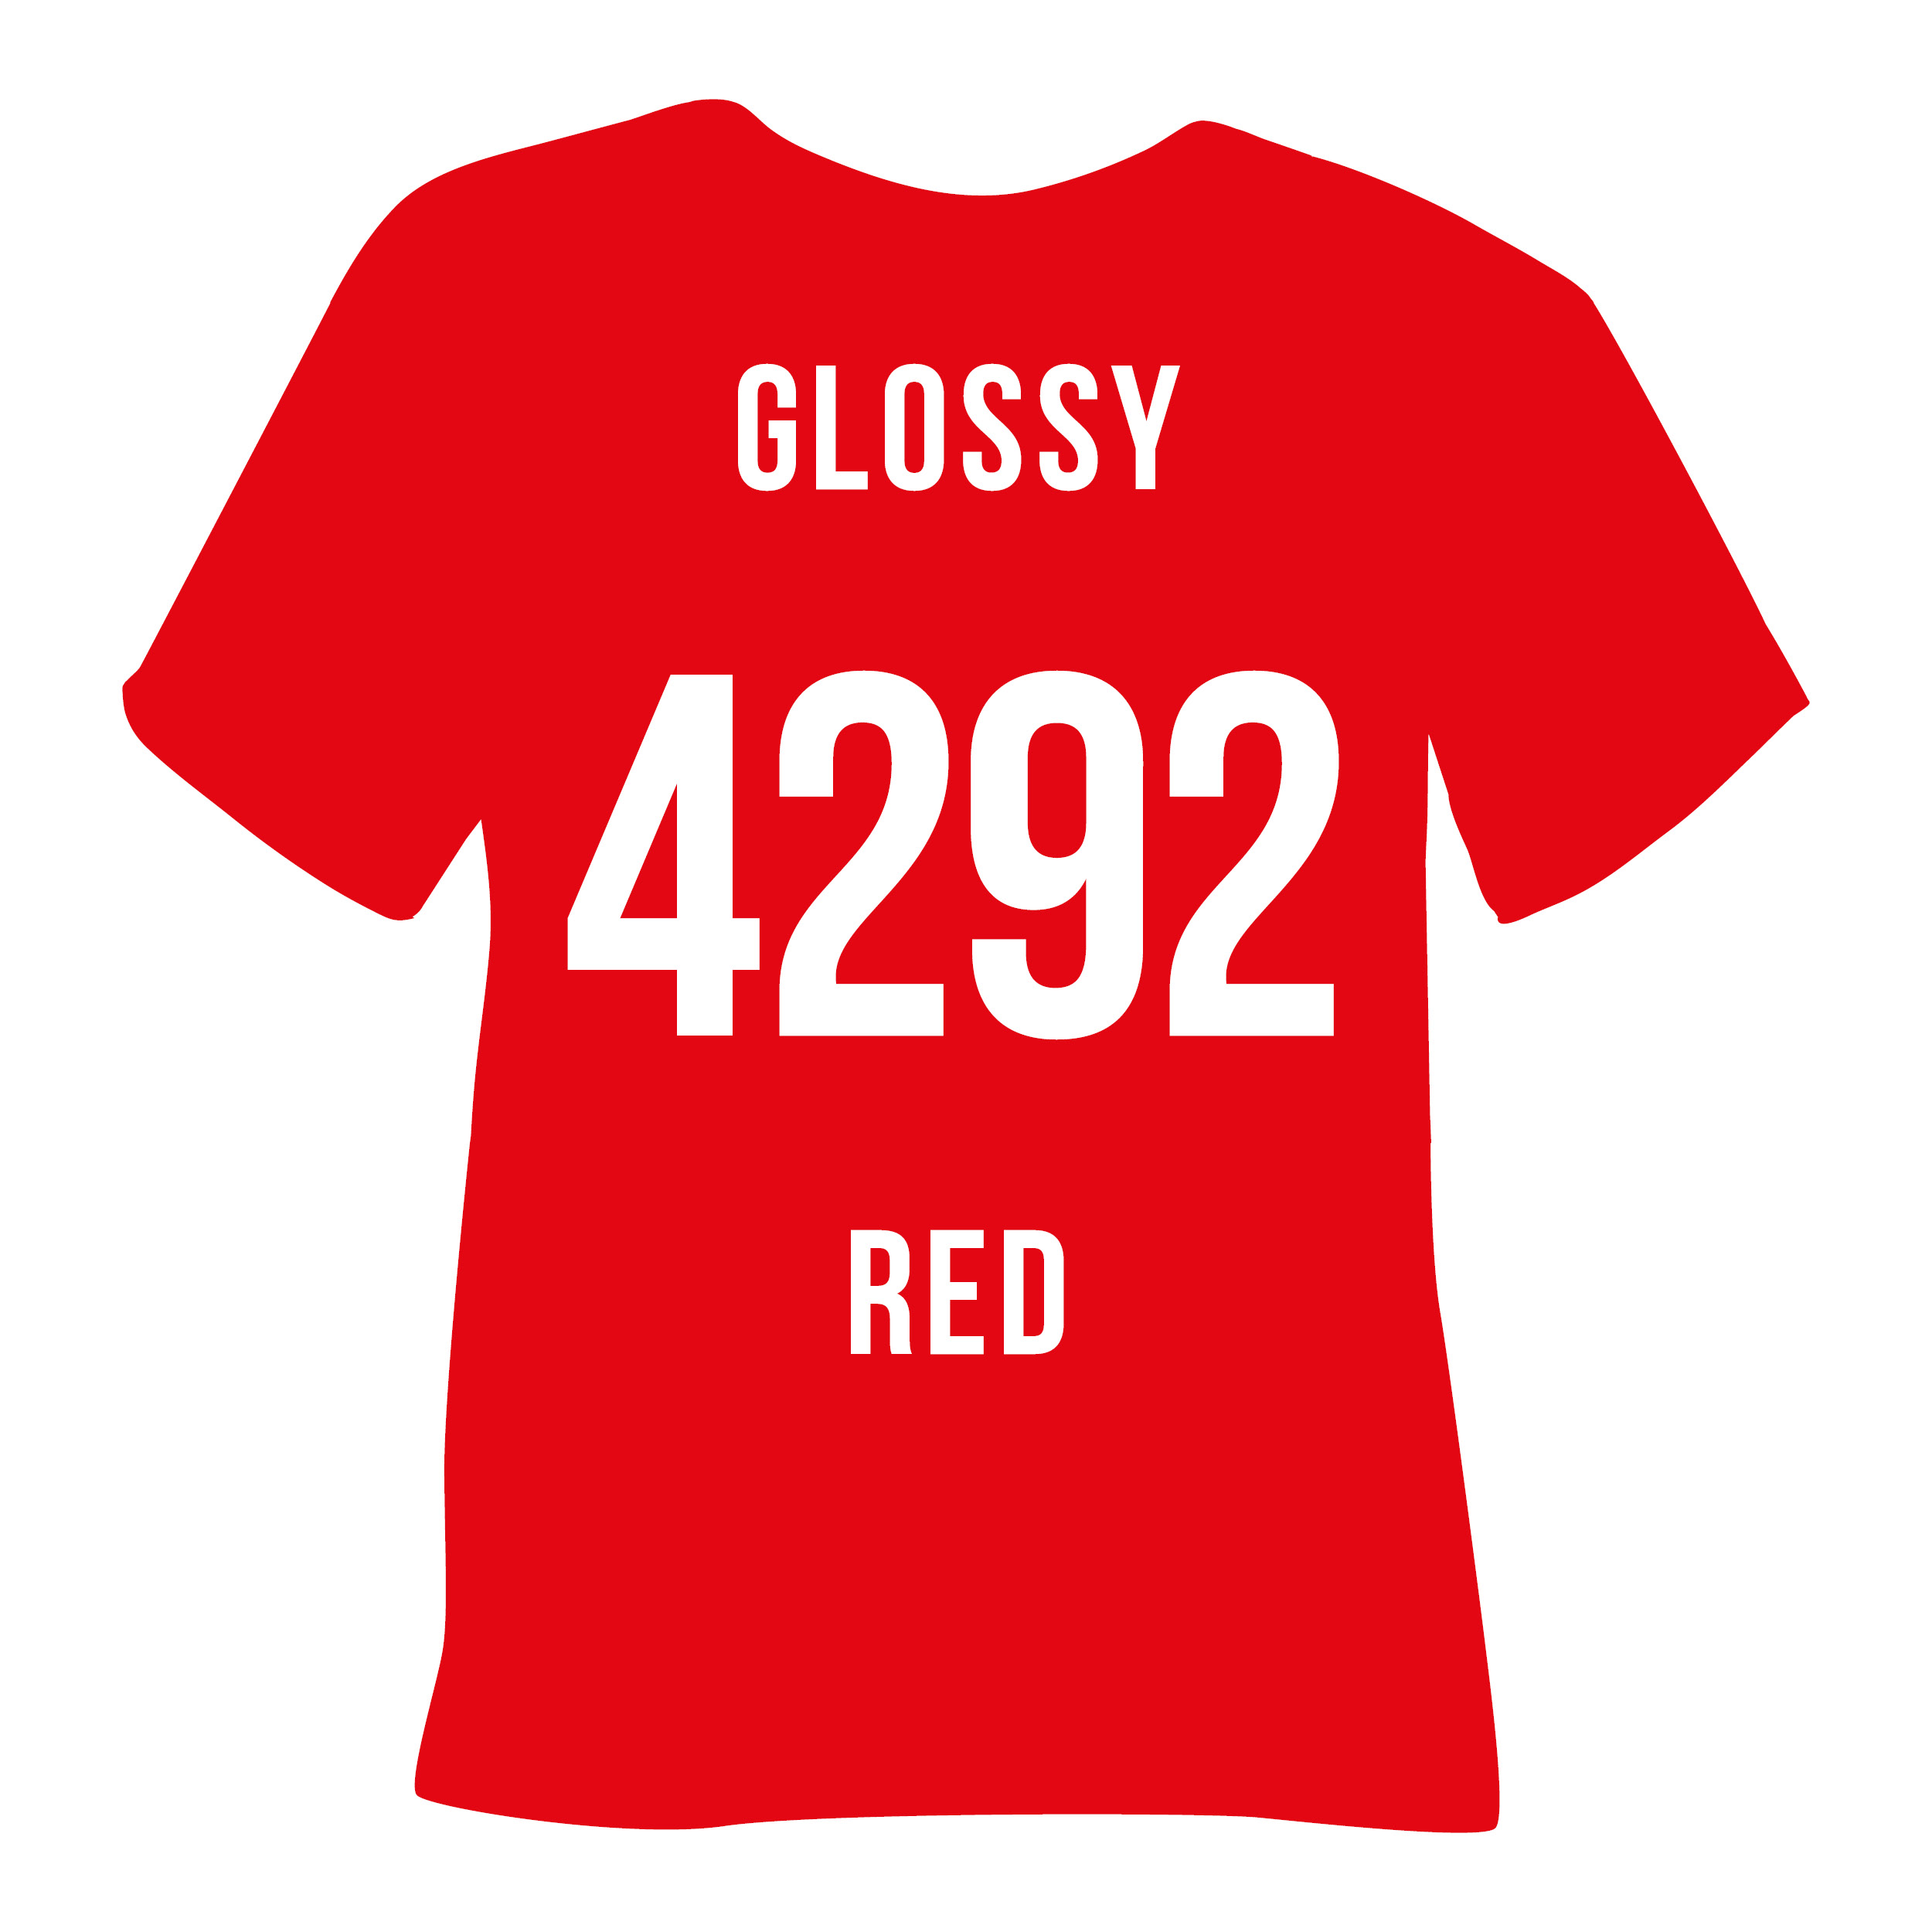 4292 GLOSSY RED